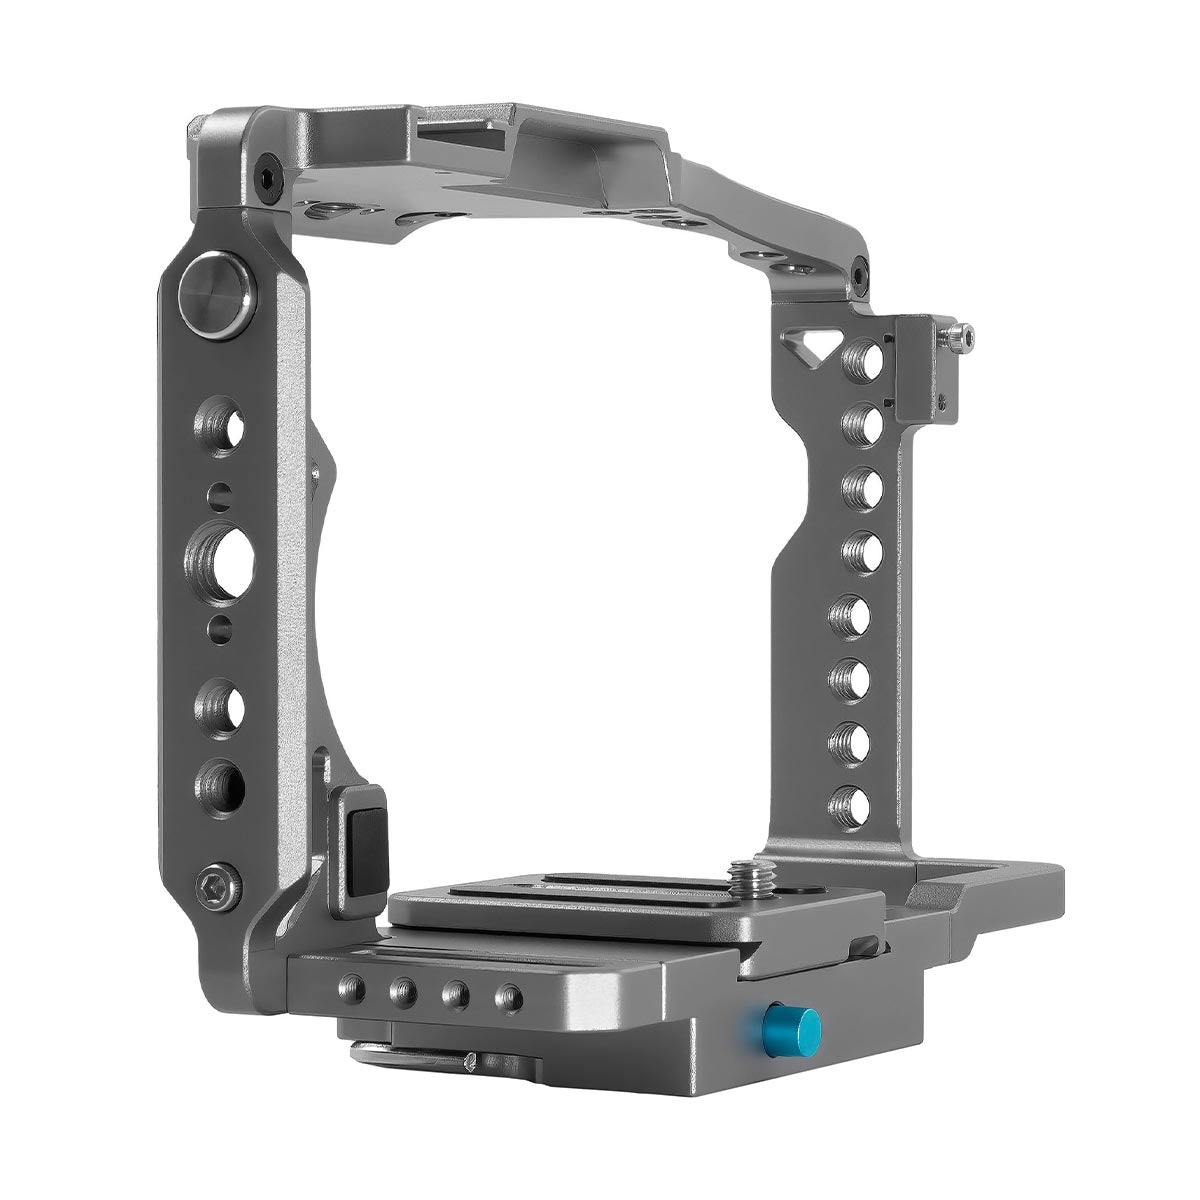 Kondor Blue A1/A7 Cage with Start-Stop Trigger Handle (Space Gray) (A1/A7S3/A74/ETC)